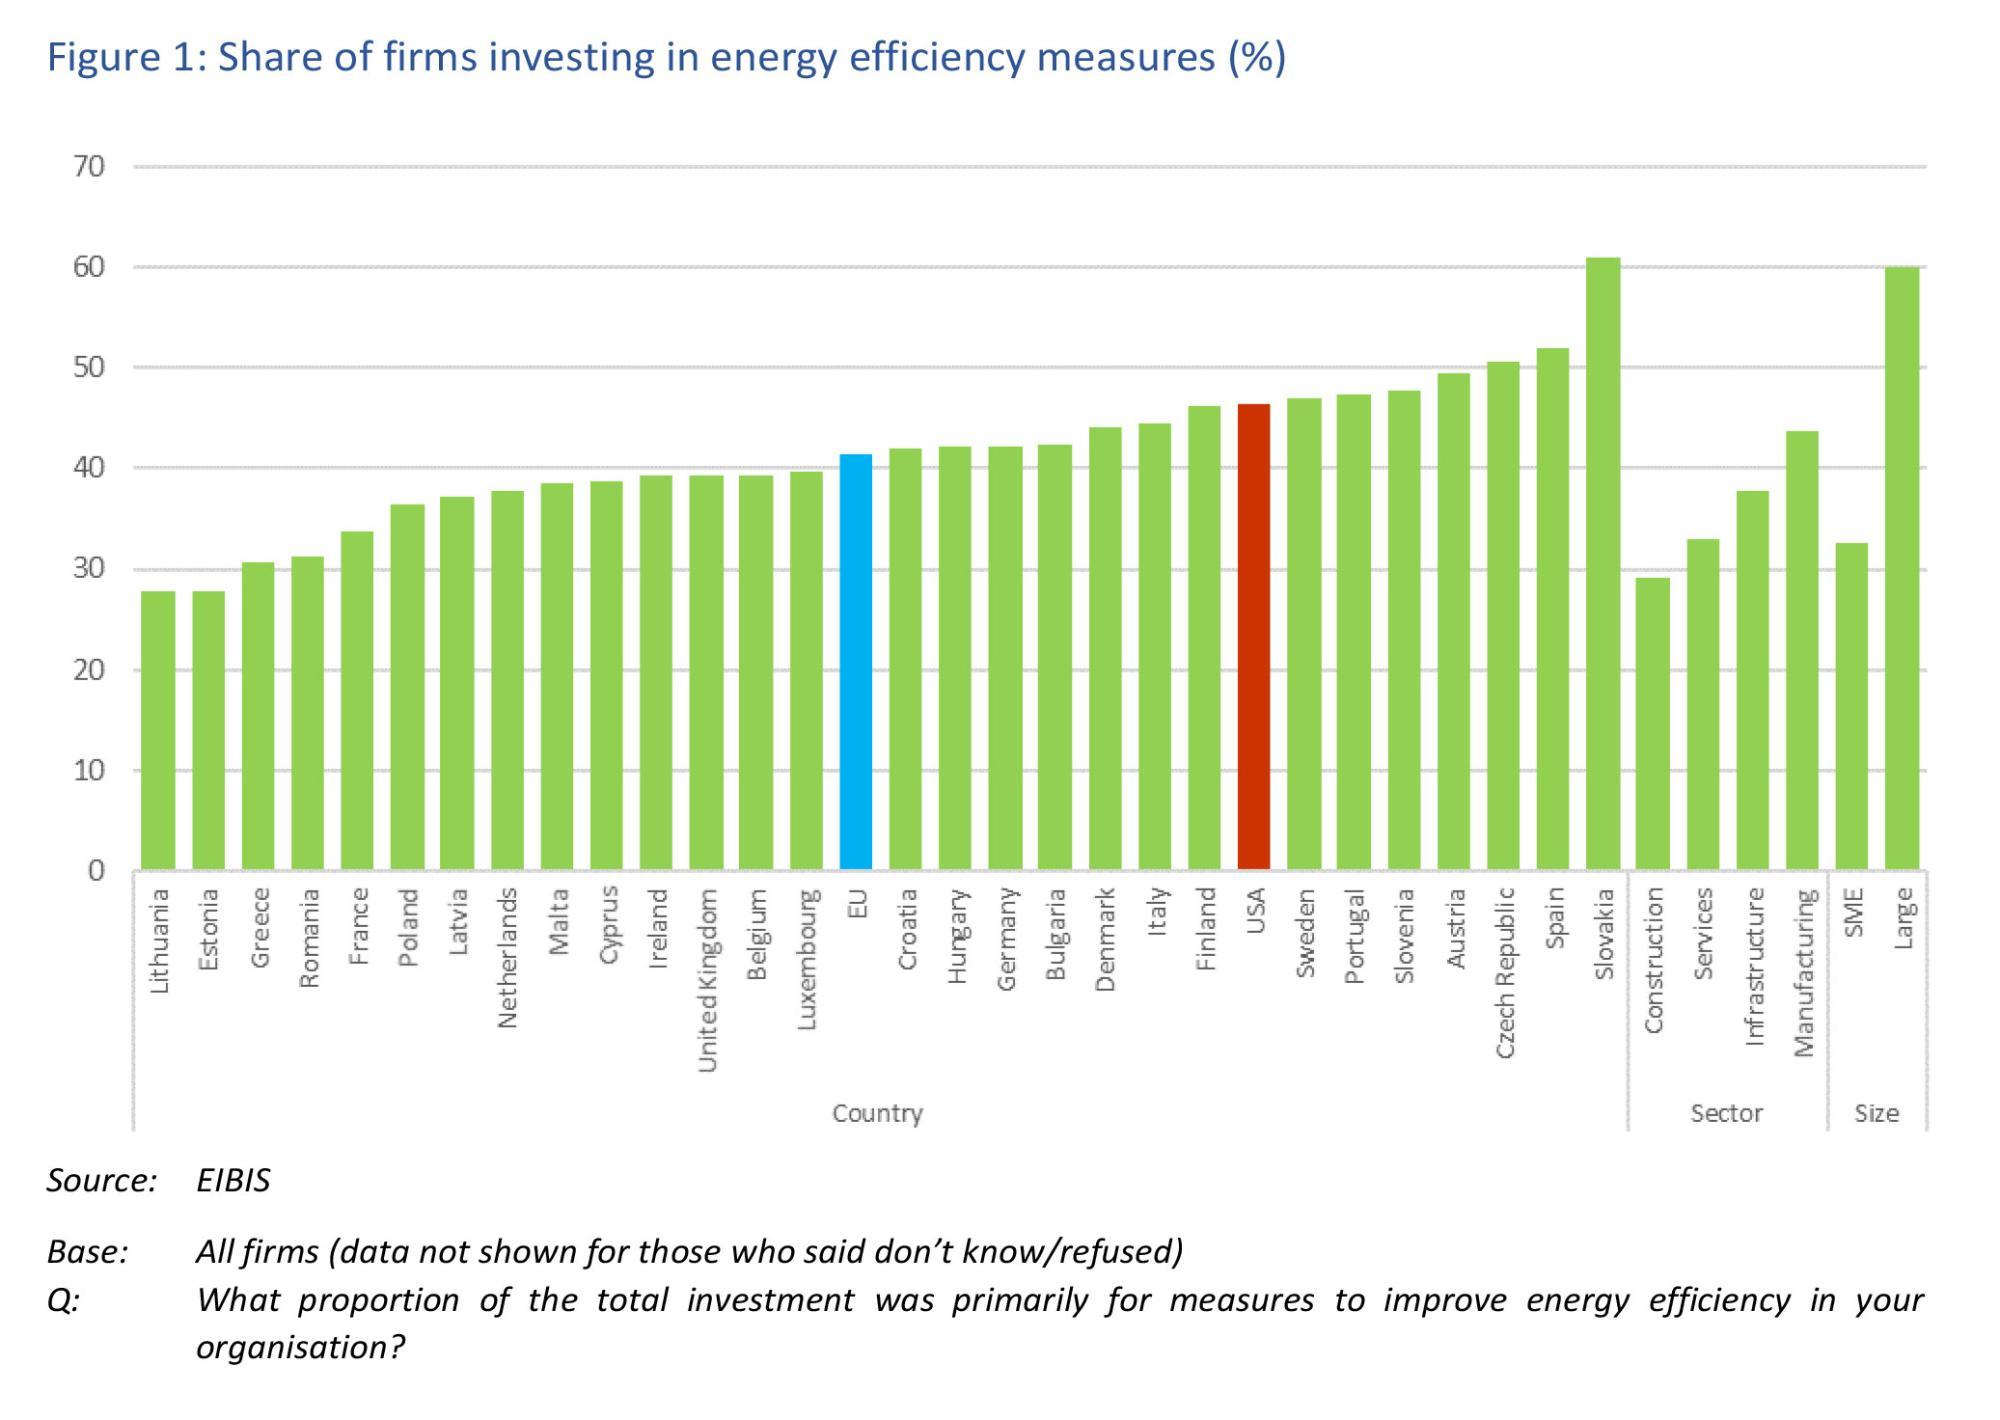 Share of firms investing in measures to improve energy efficiency (%)